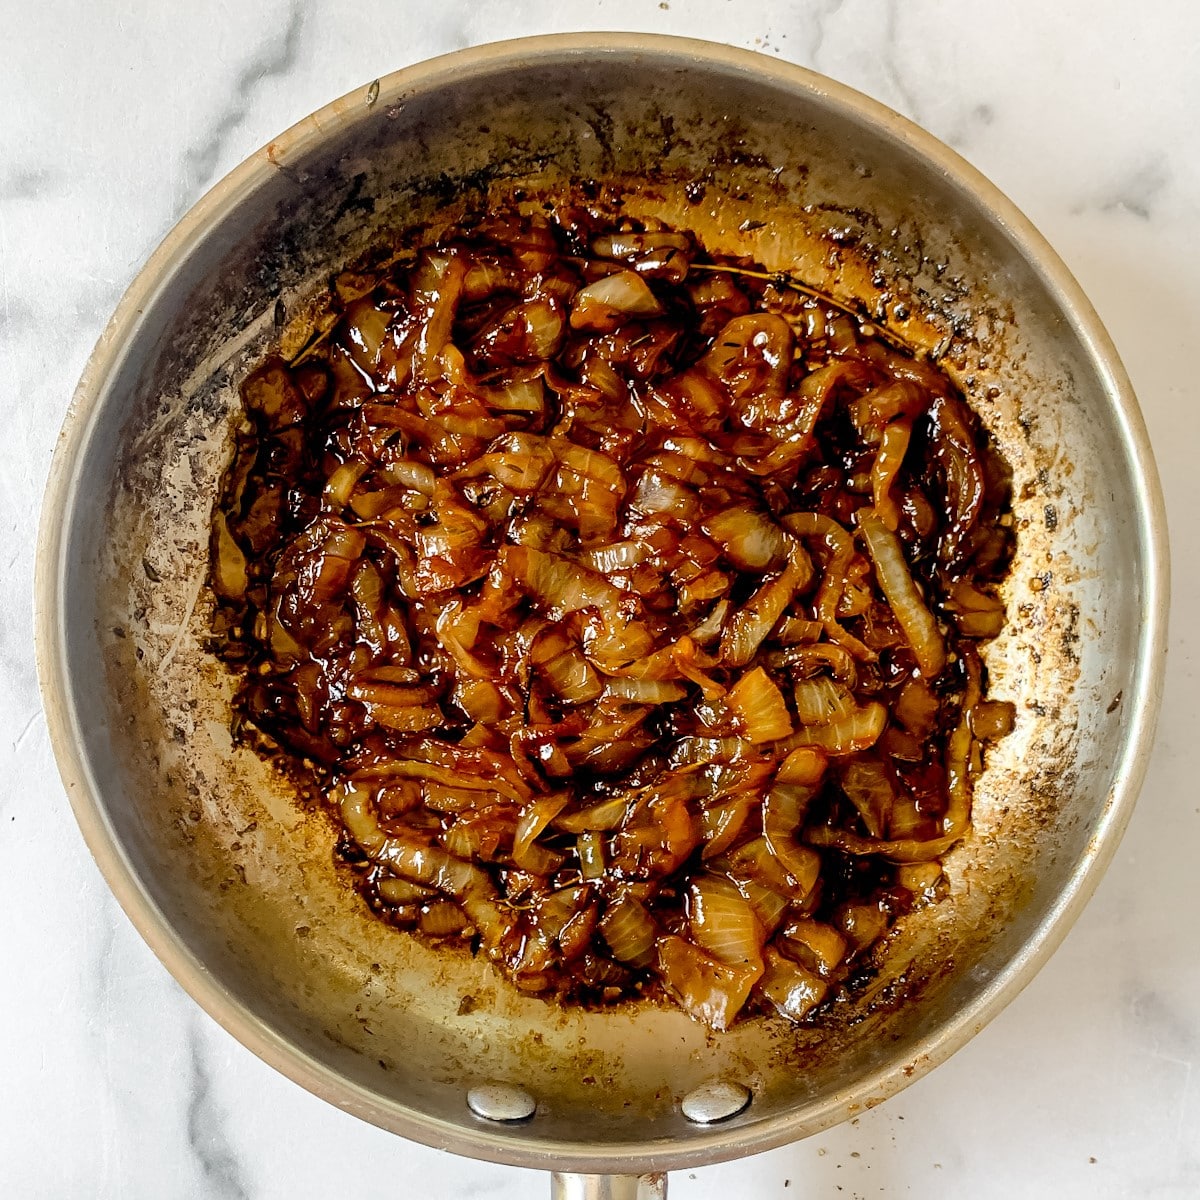 Onions and balsamic vinegar in a saute pan.